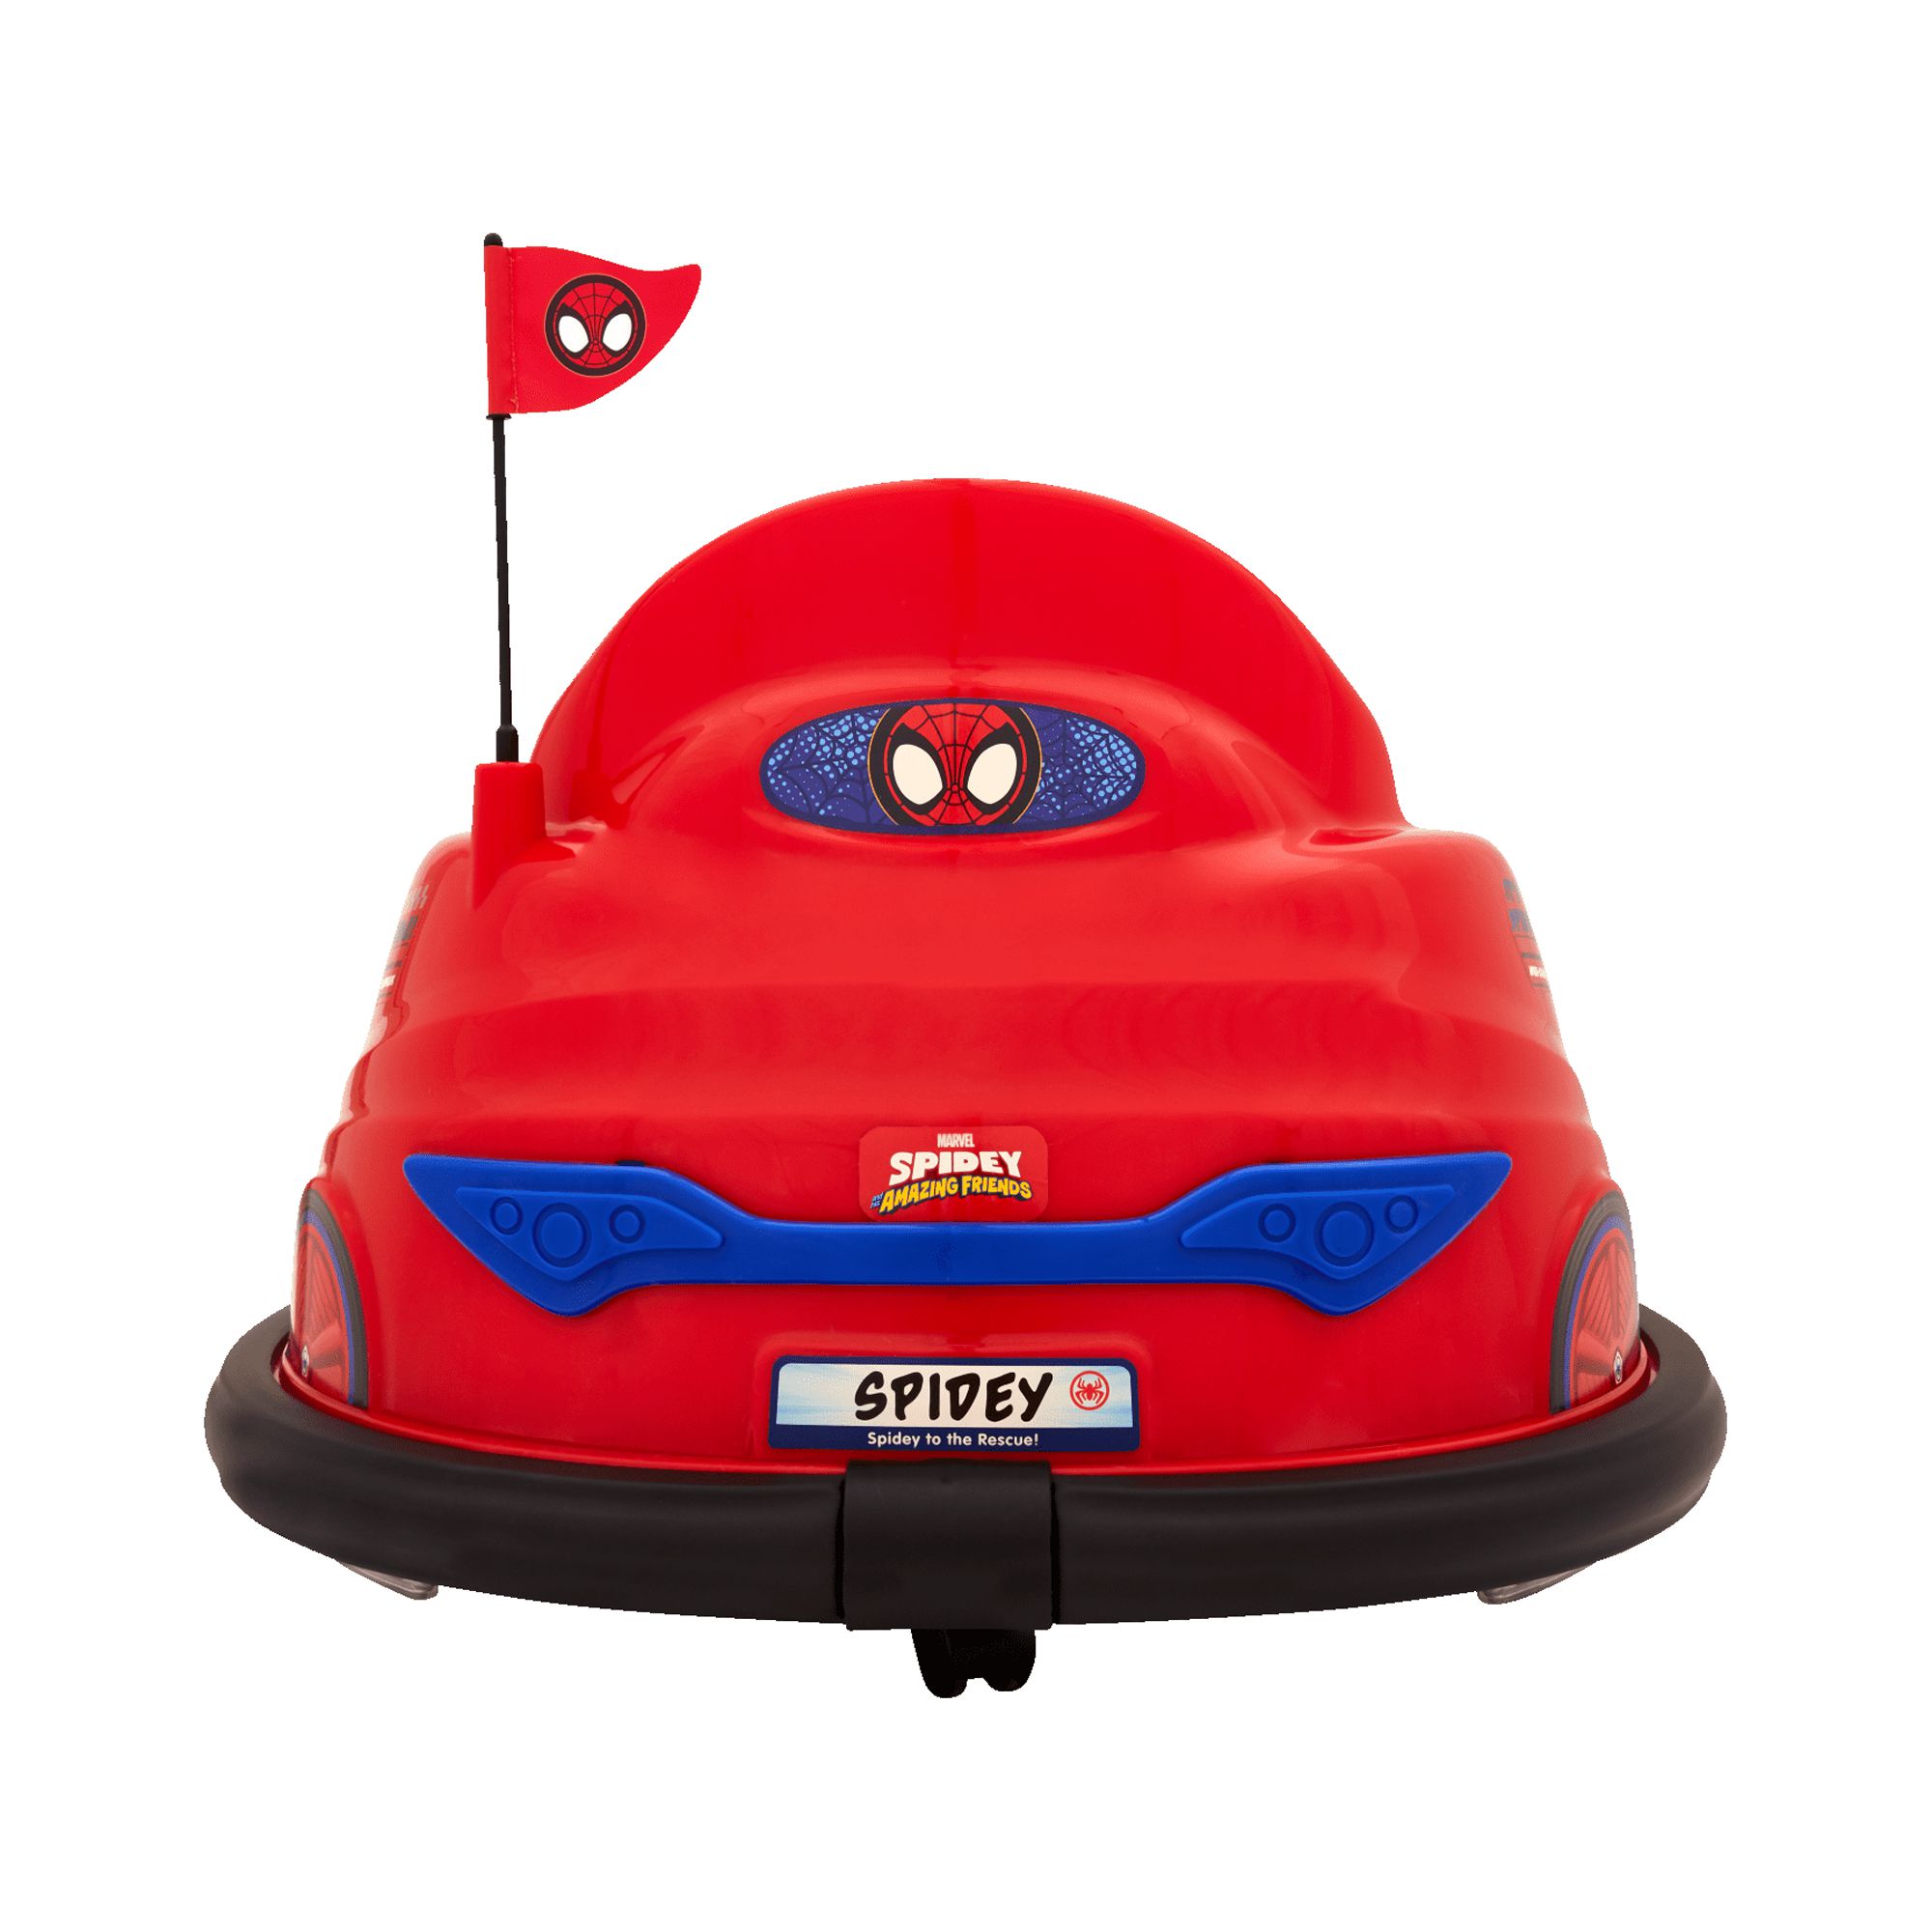 Spidey and His Amazing Friends, 6 Volts Bumper Car, Battery Powered Ride on, Fun LED Lights Includes, Charger, Ages 1.5- 4 Years, Unisex - image 12 of 14